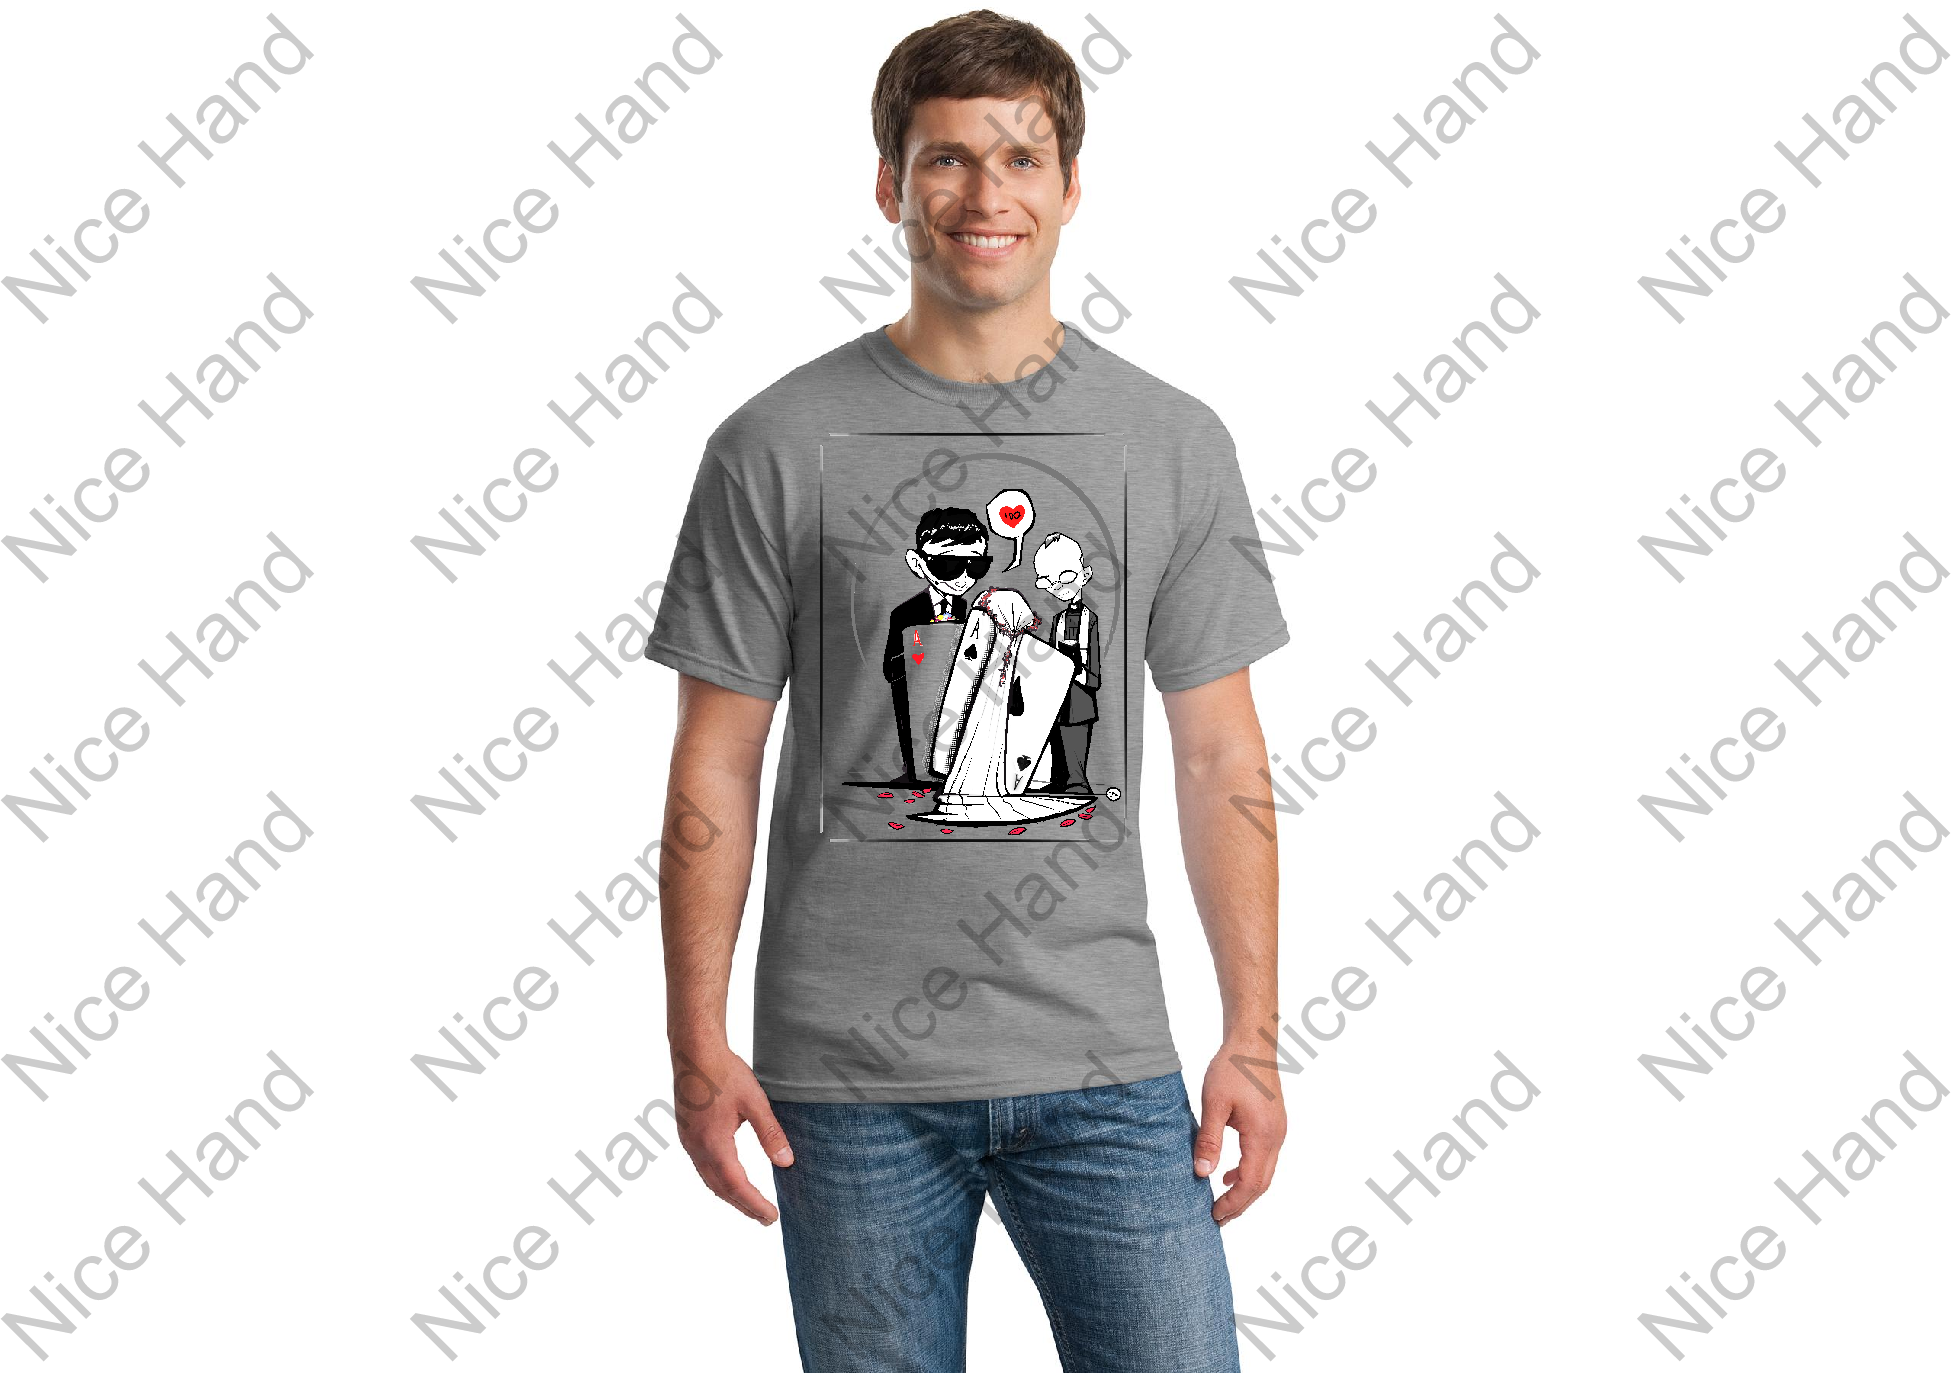 Married To Aces T-shirt - Marriedoutlinegrey